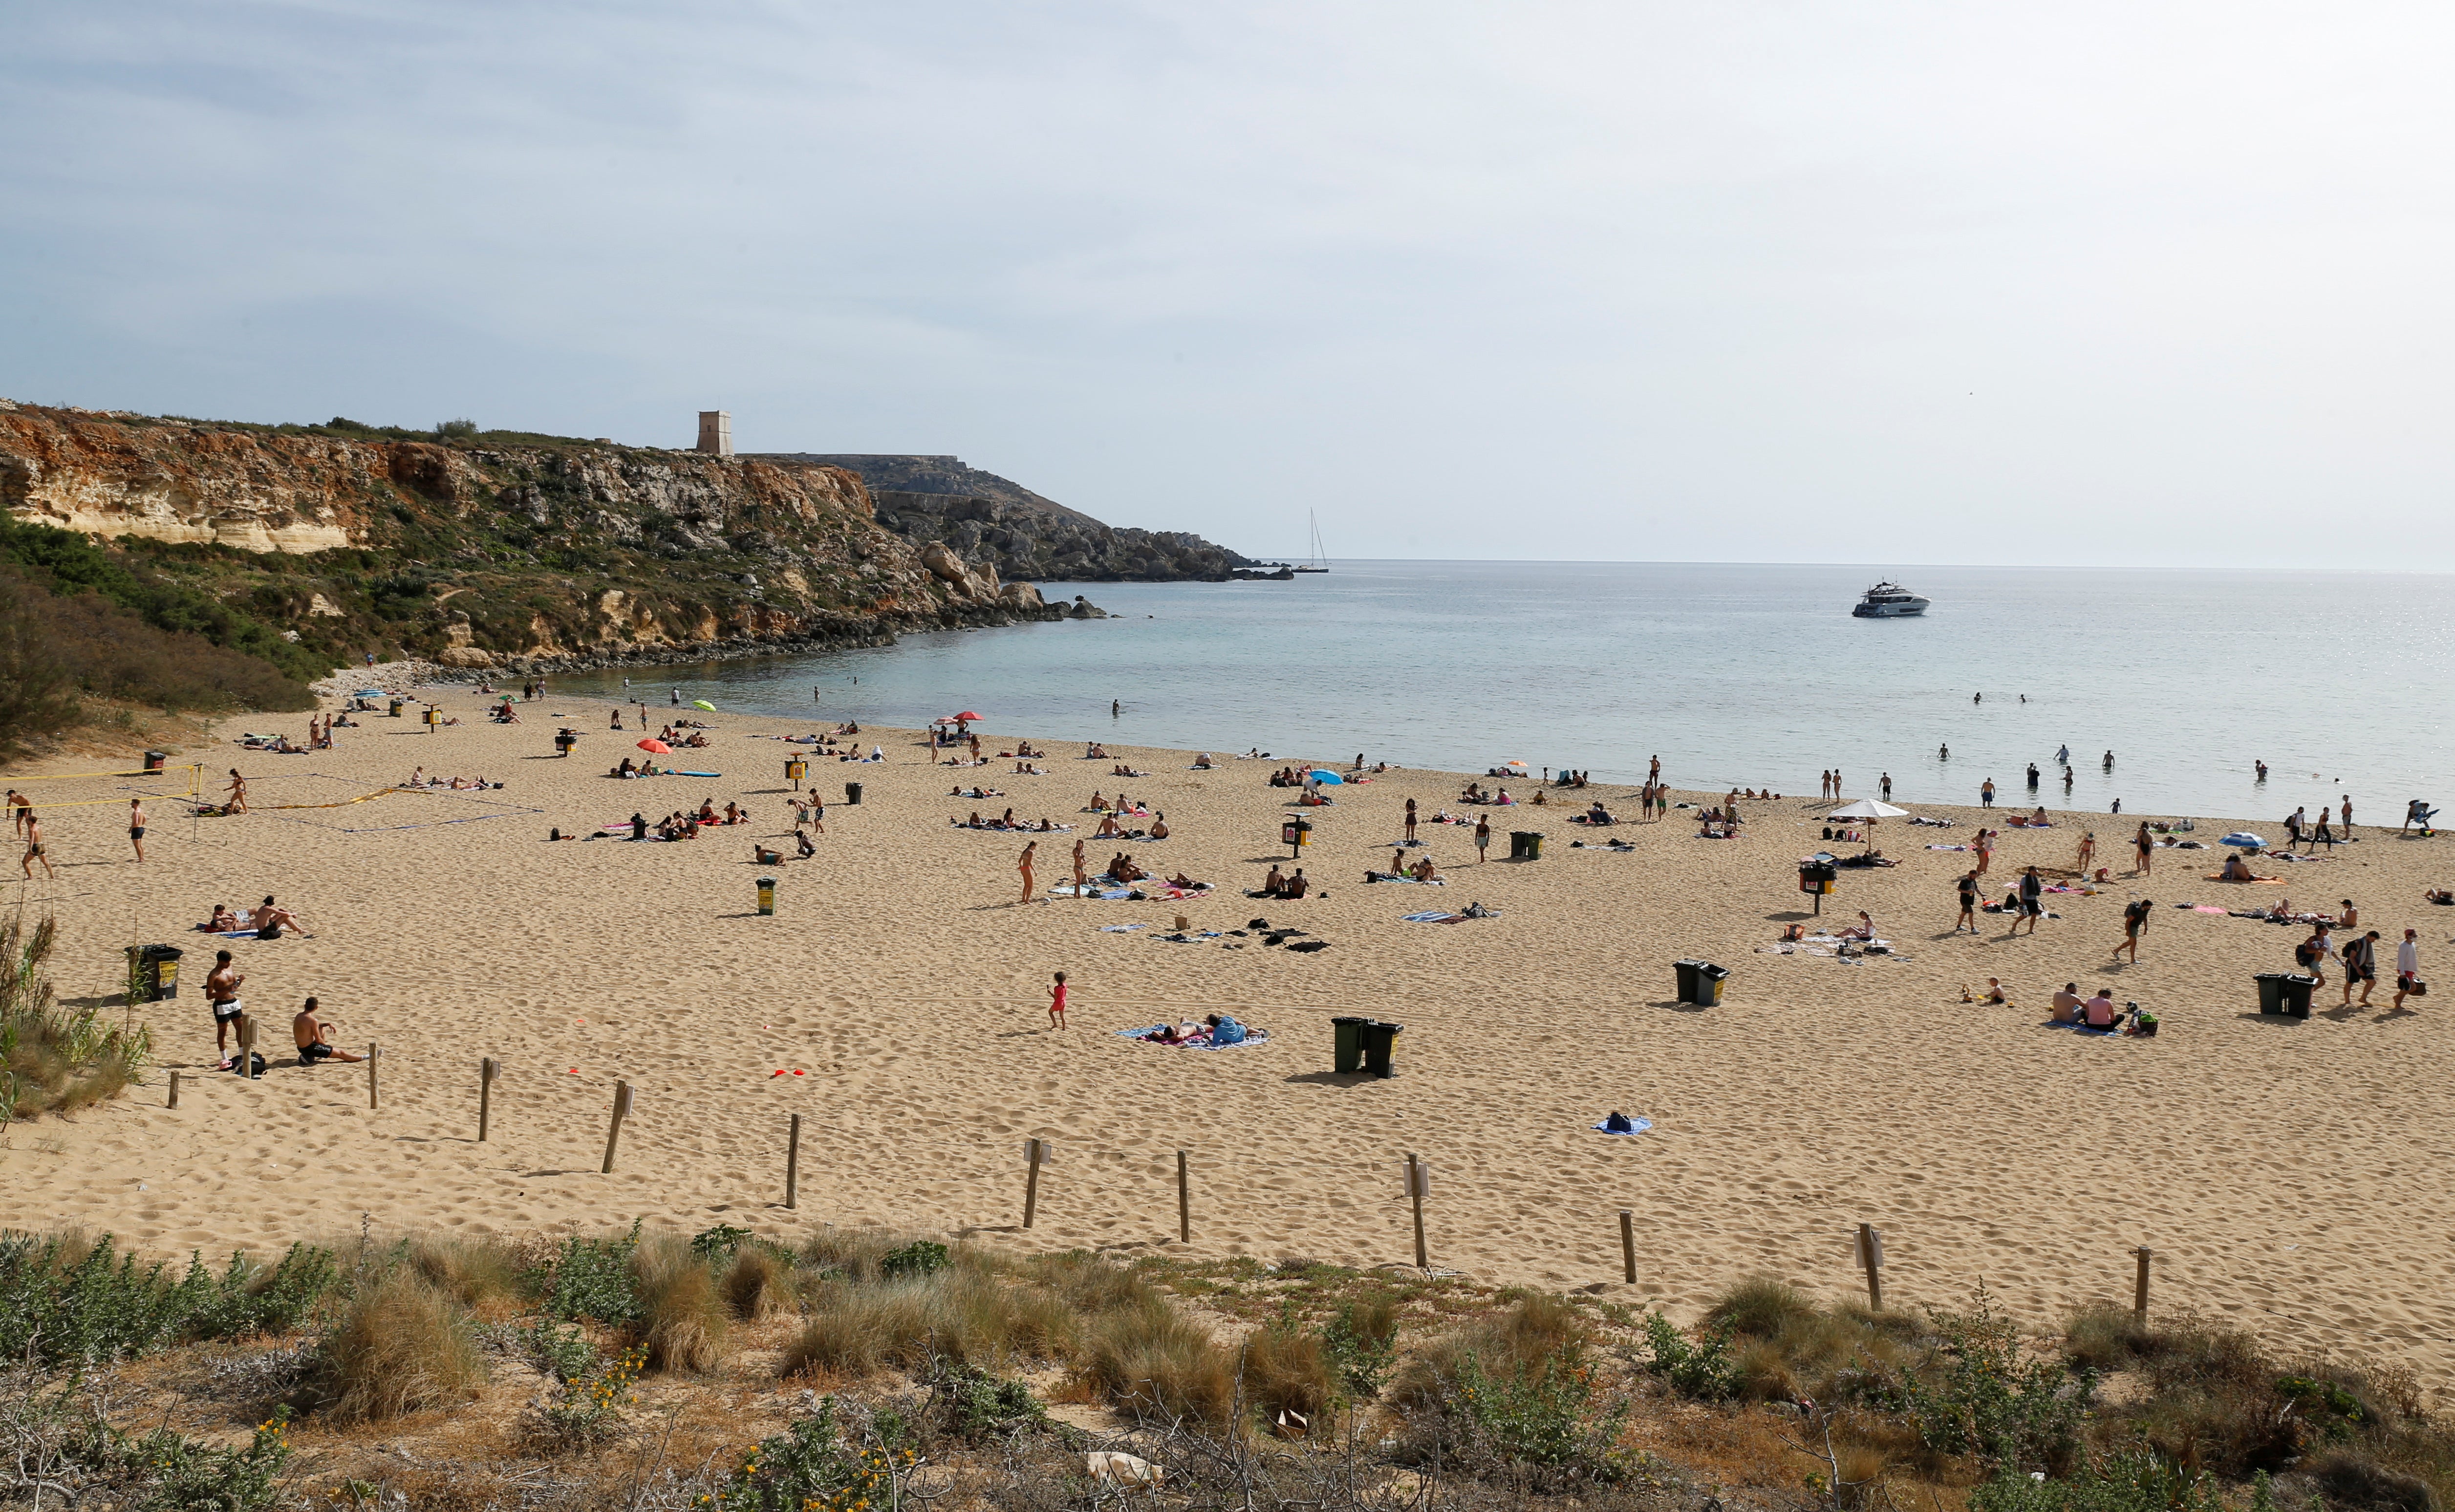 Stephen Martin Thomas moved to Malta to start a new life three years ago (pictured a beach in Malta)